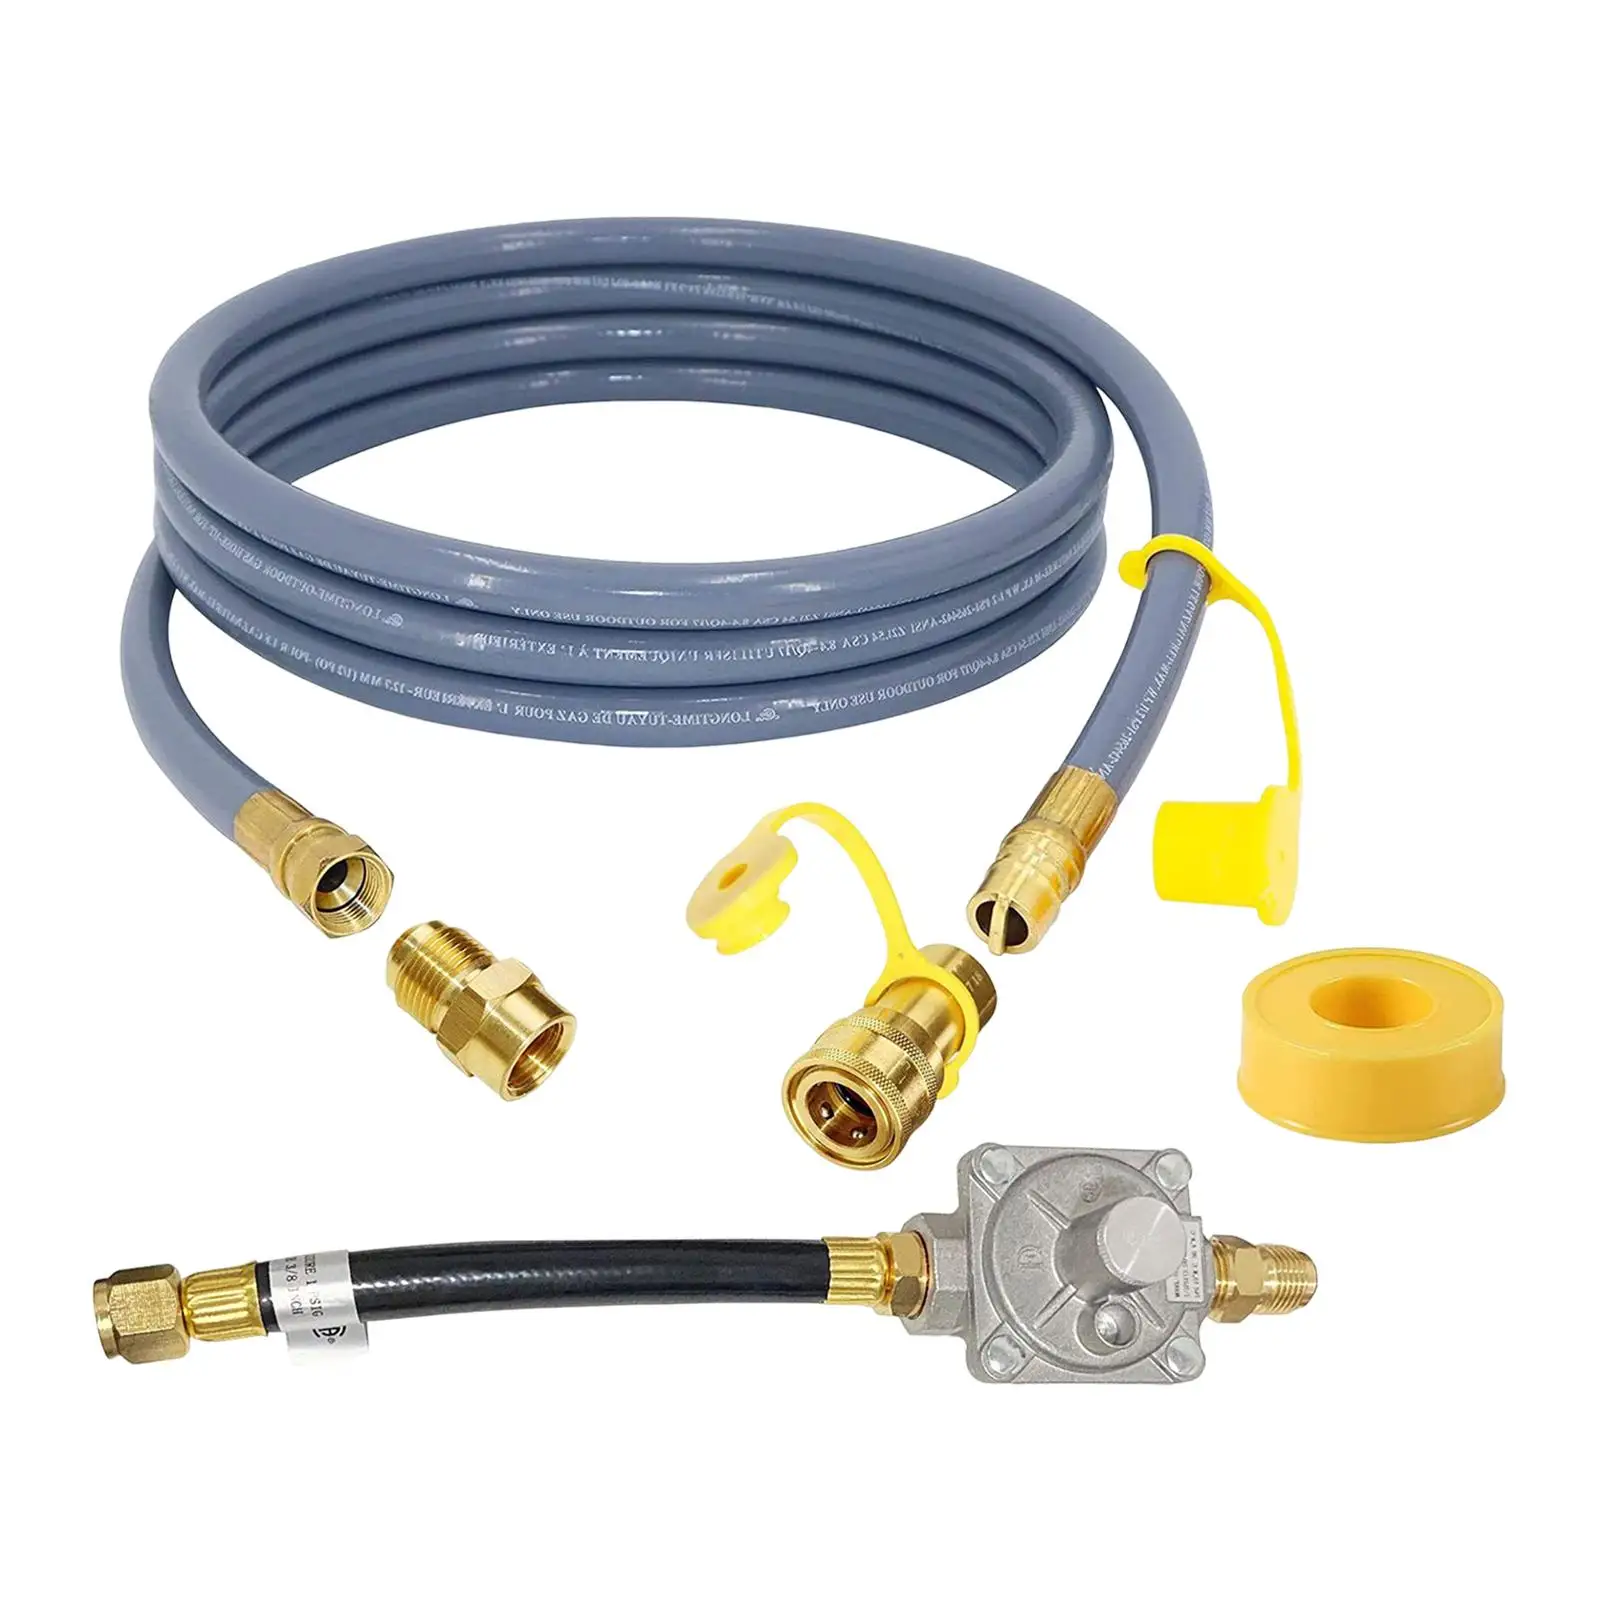 10ft 1/2 inch Natural Gas Hose with Quick Connect Fitting Natural Gas Conversion Kit for Grill Patio Heater BBQ Pizza Oven